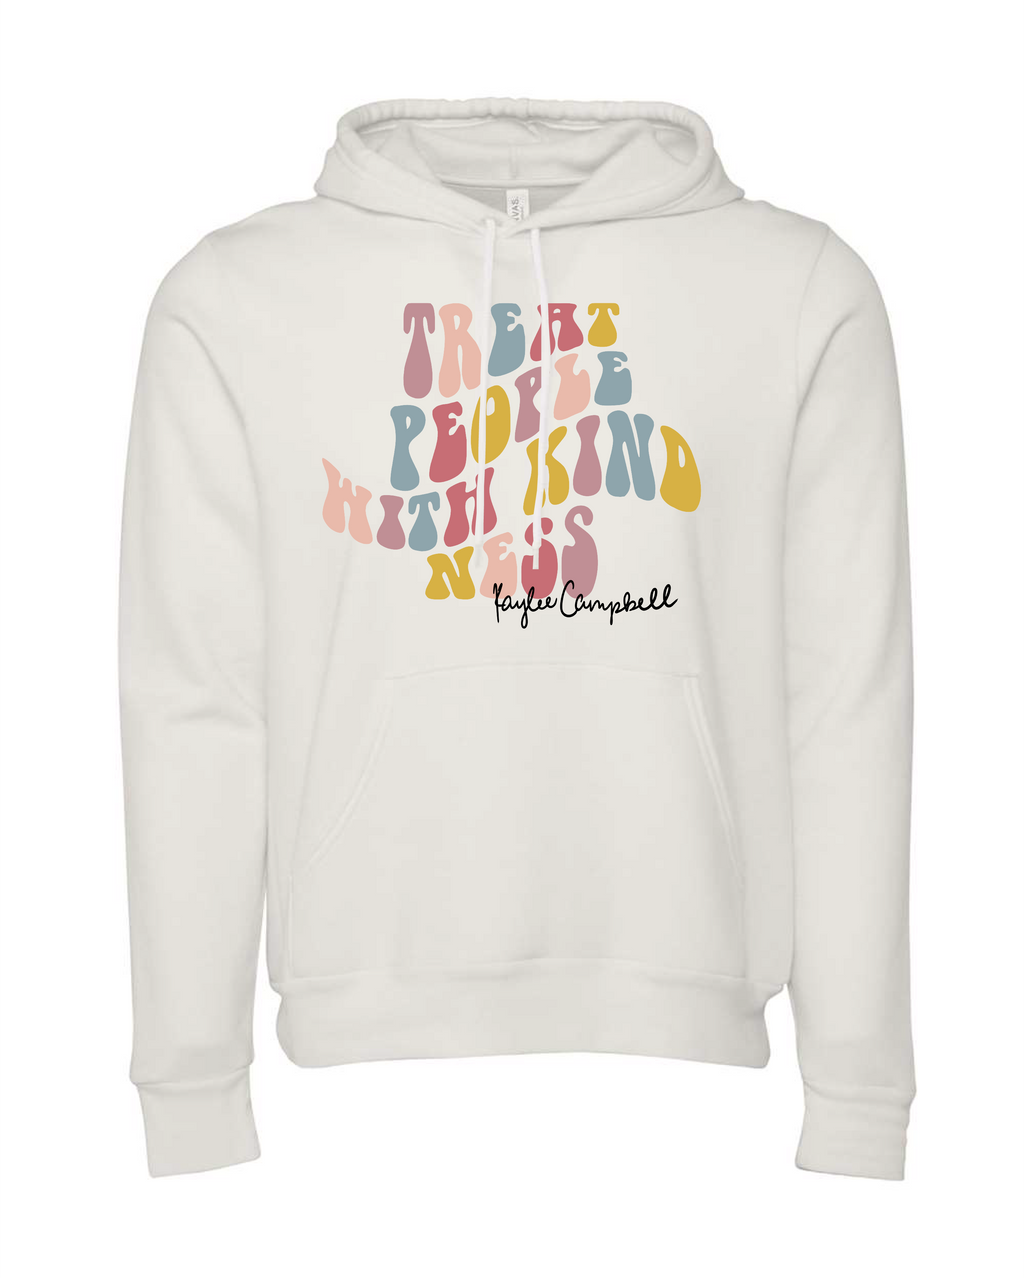 TREAT PEOPLE WITH KINDNESS (RAINBOW) (HOODIES - additional colors)